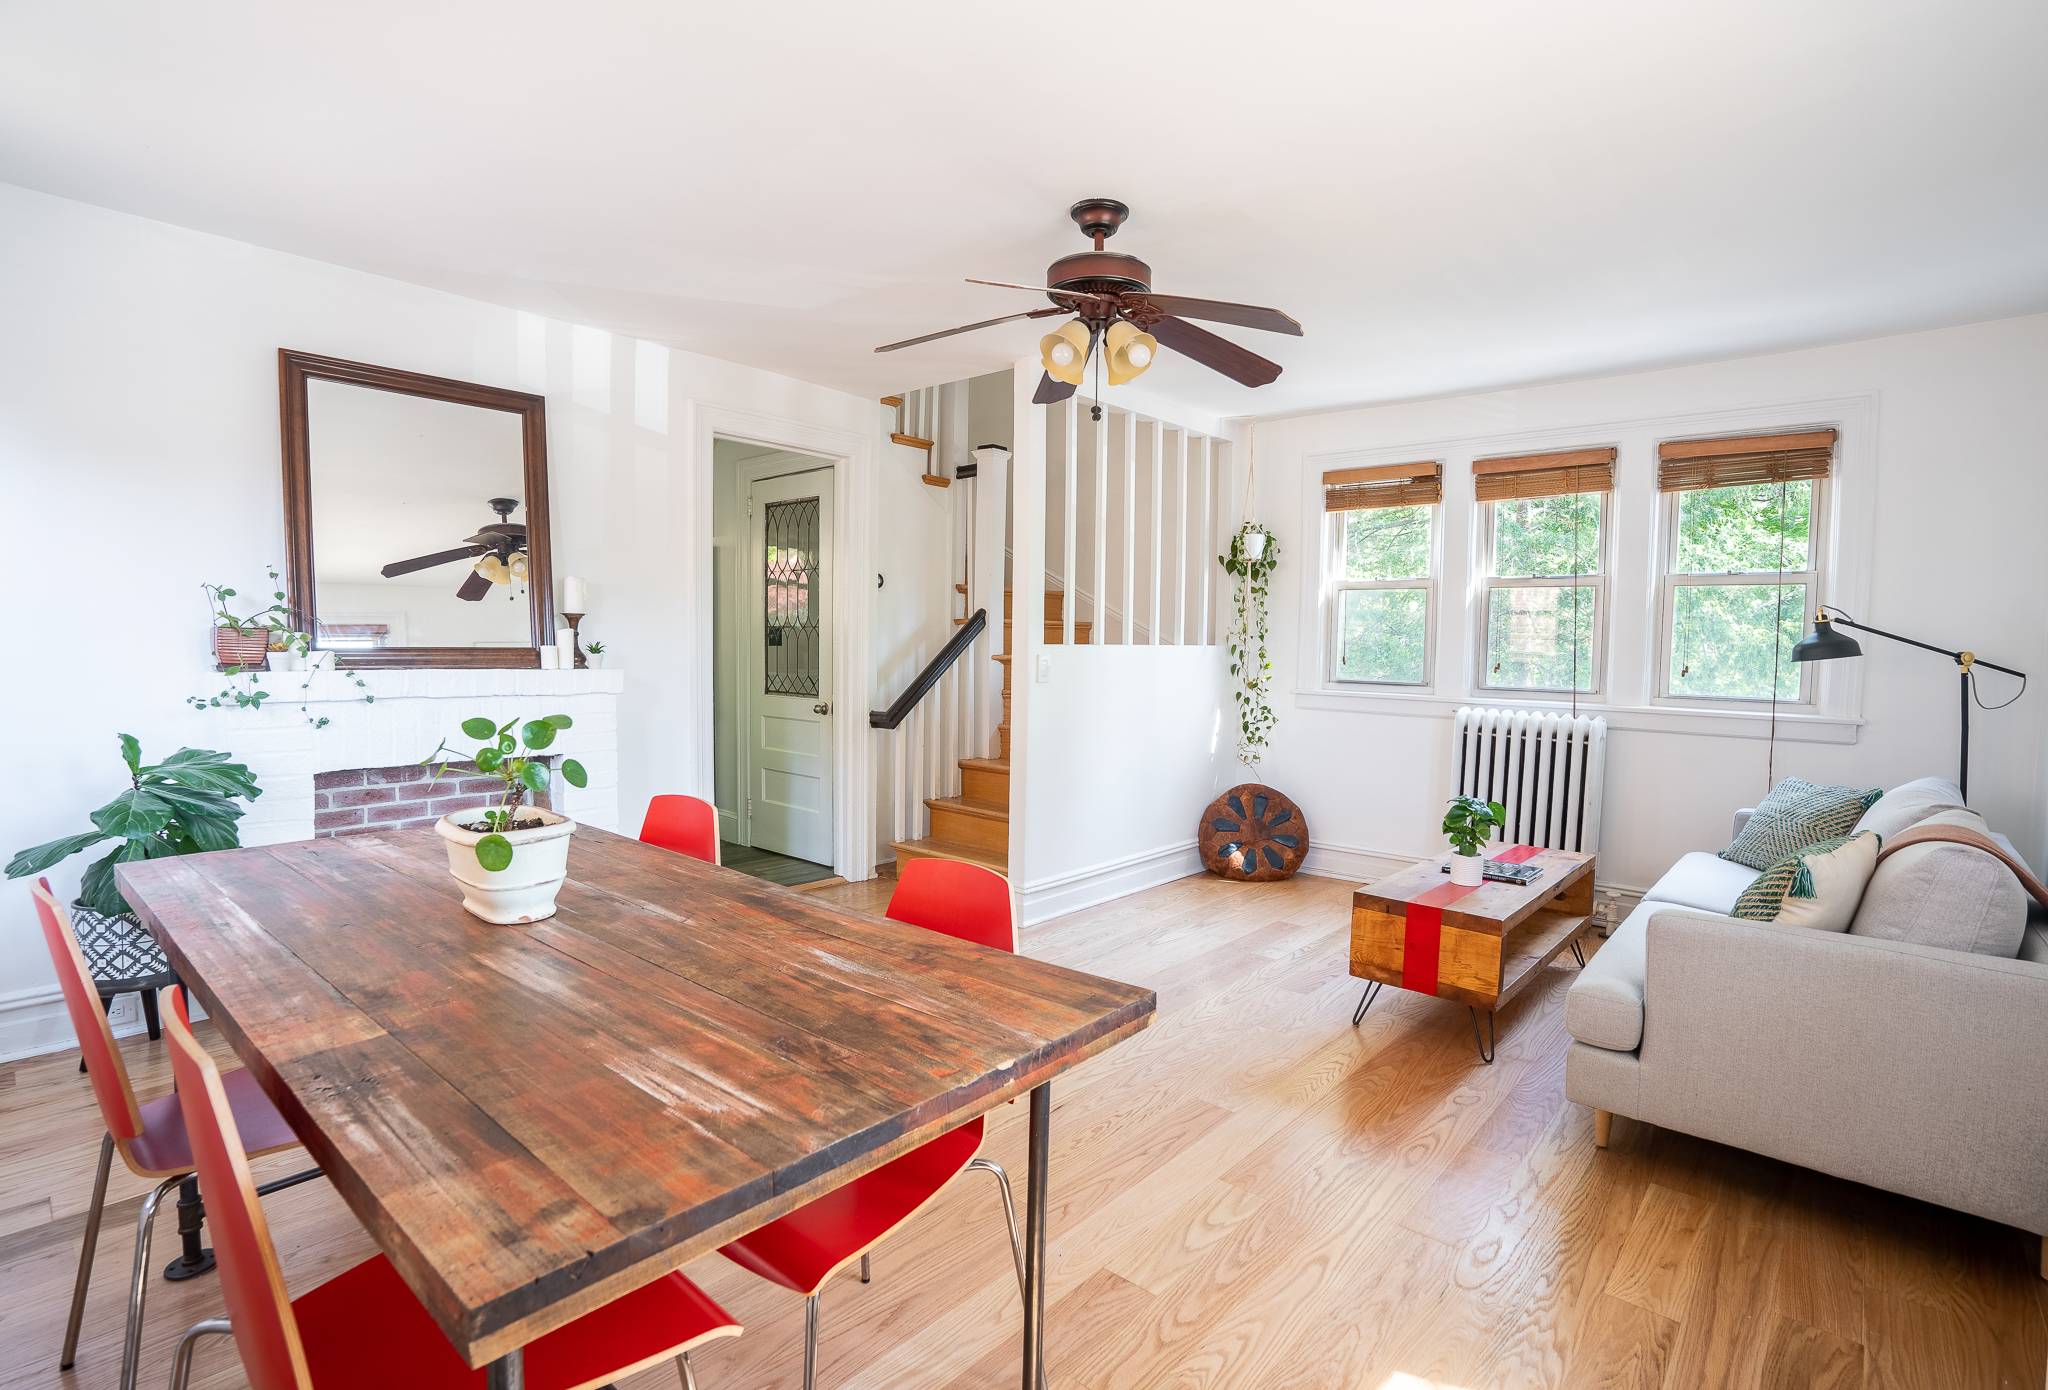 Built in 1932, this 3 story beautifully proportioned, renovated, restored and elegant single family home is perfect for a Co op or Condo buyer that dreams about a house.